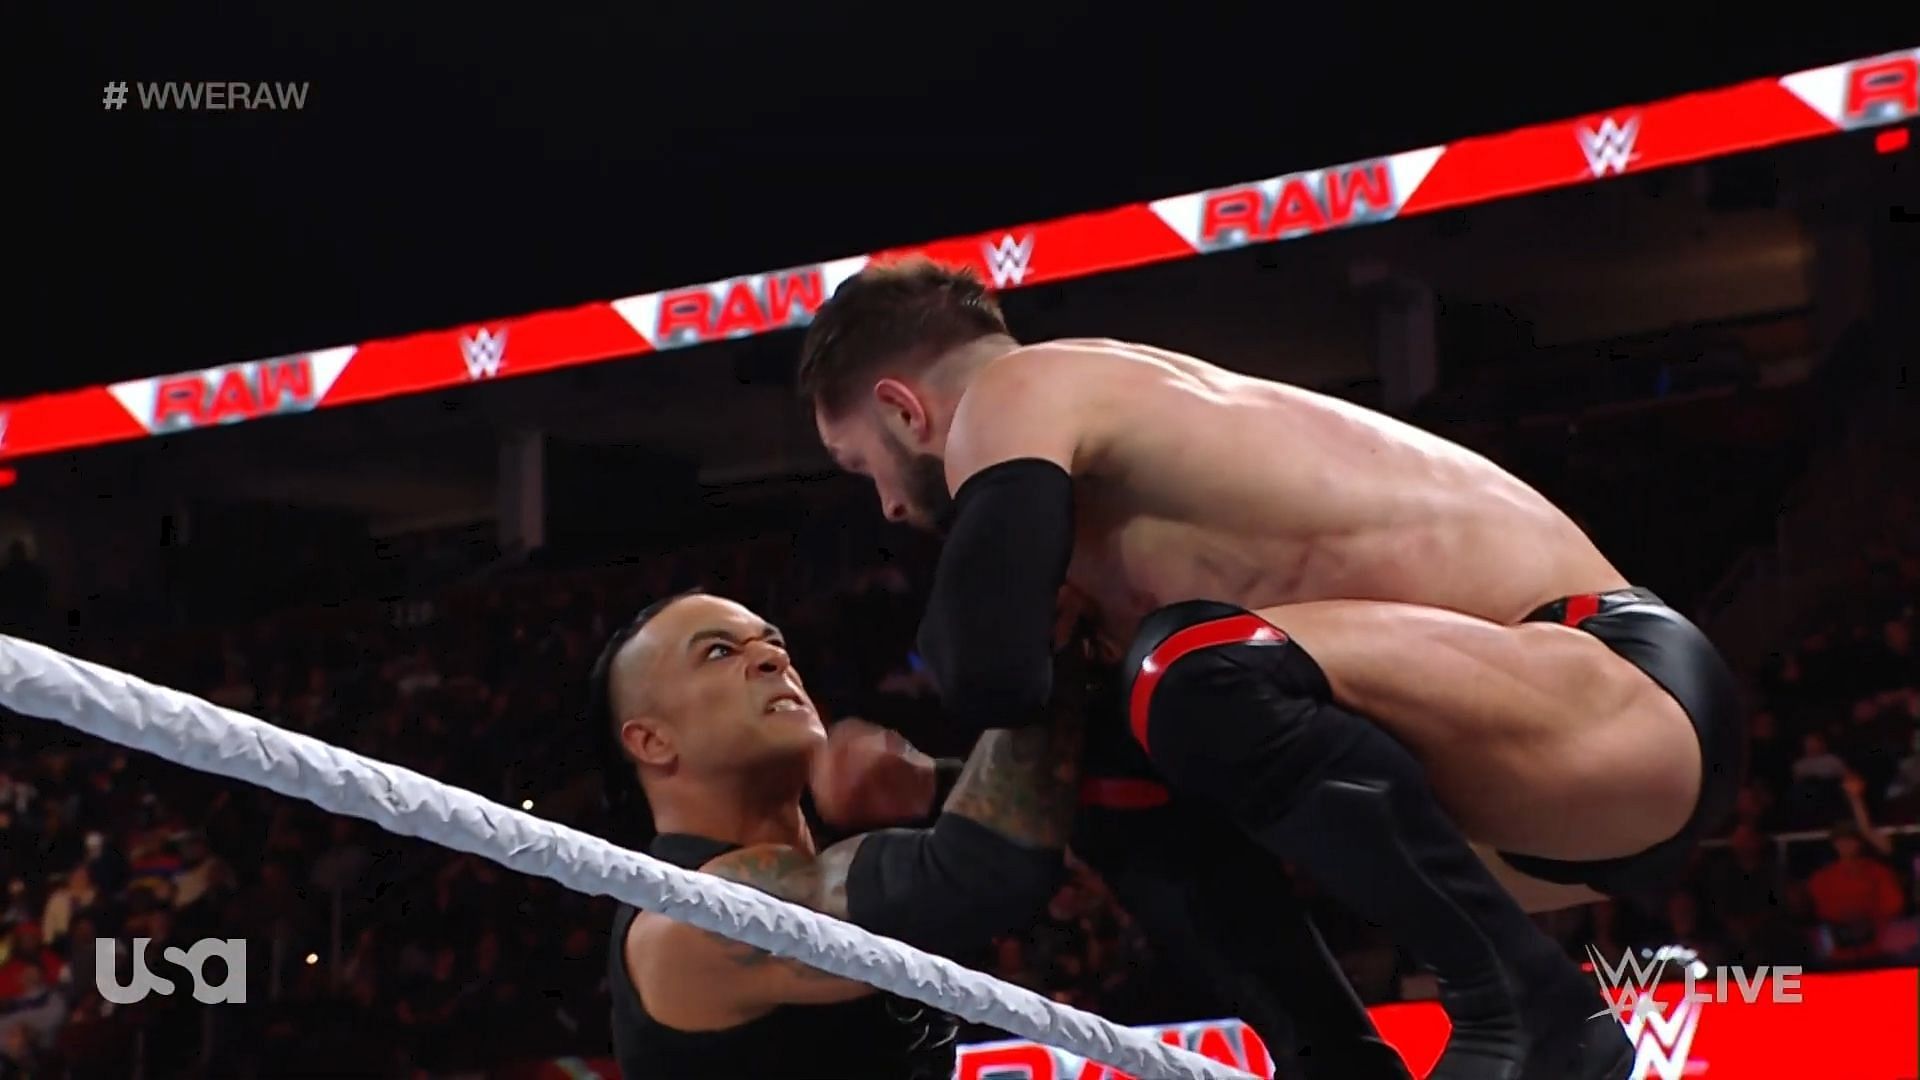 Finn Balor will look to get back at Damian Priest on WWE RAW